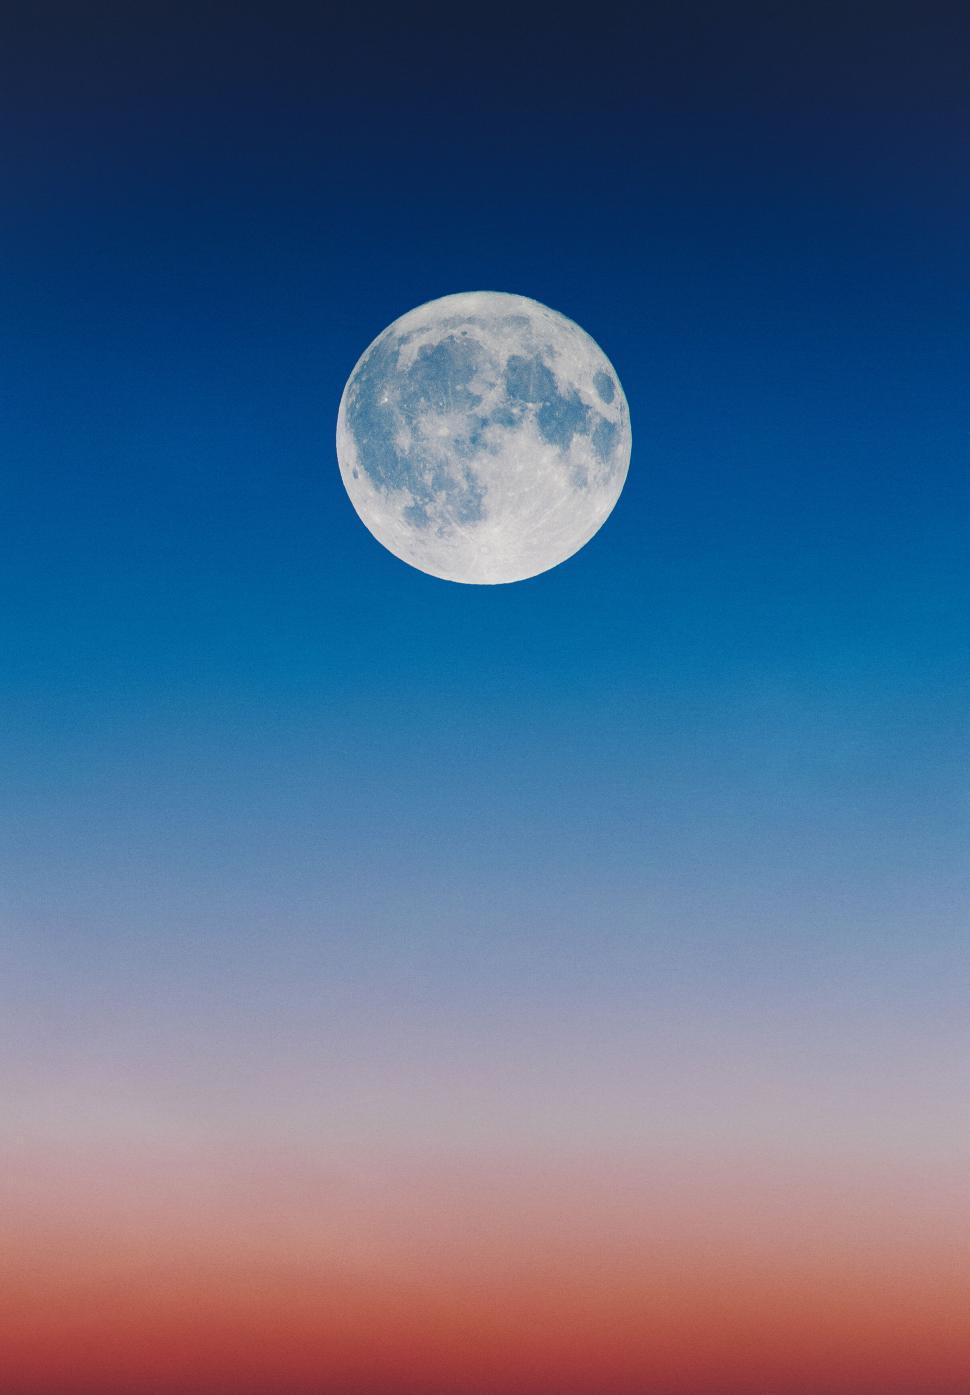 Free Image of A full moon in the sky 